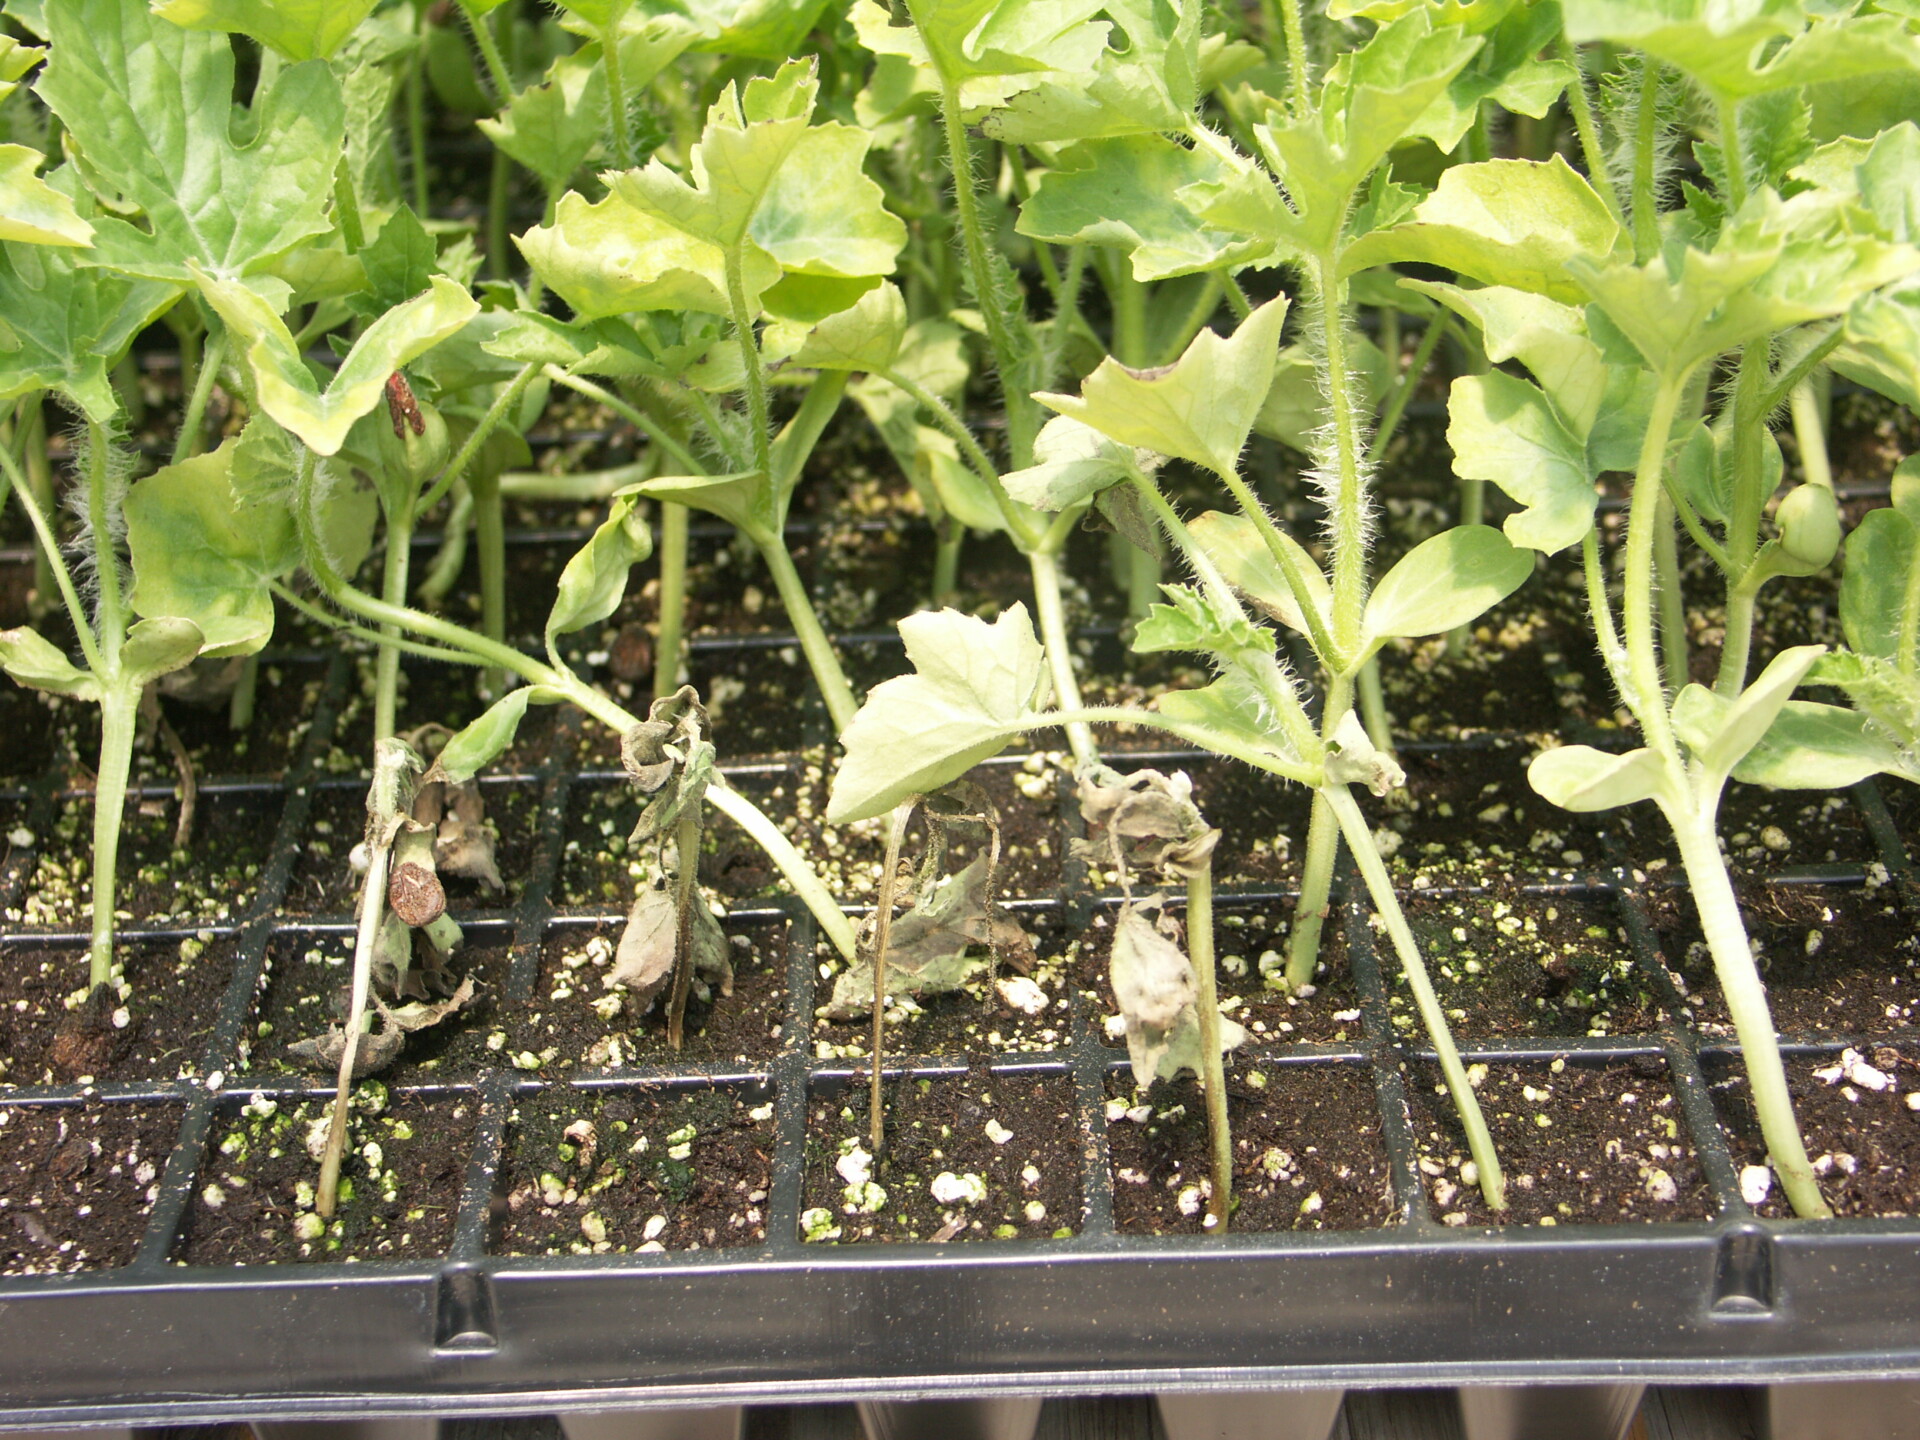 Figure 7. Distribution of Fusarium wilt of watermelon in transplant trays may be clustered under some circumstances.